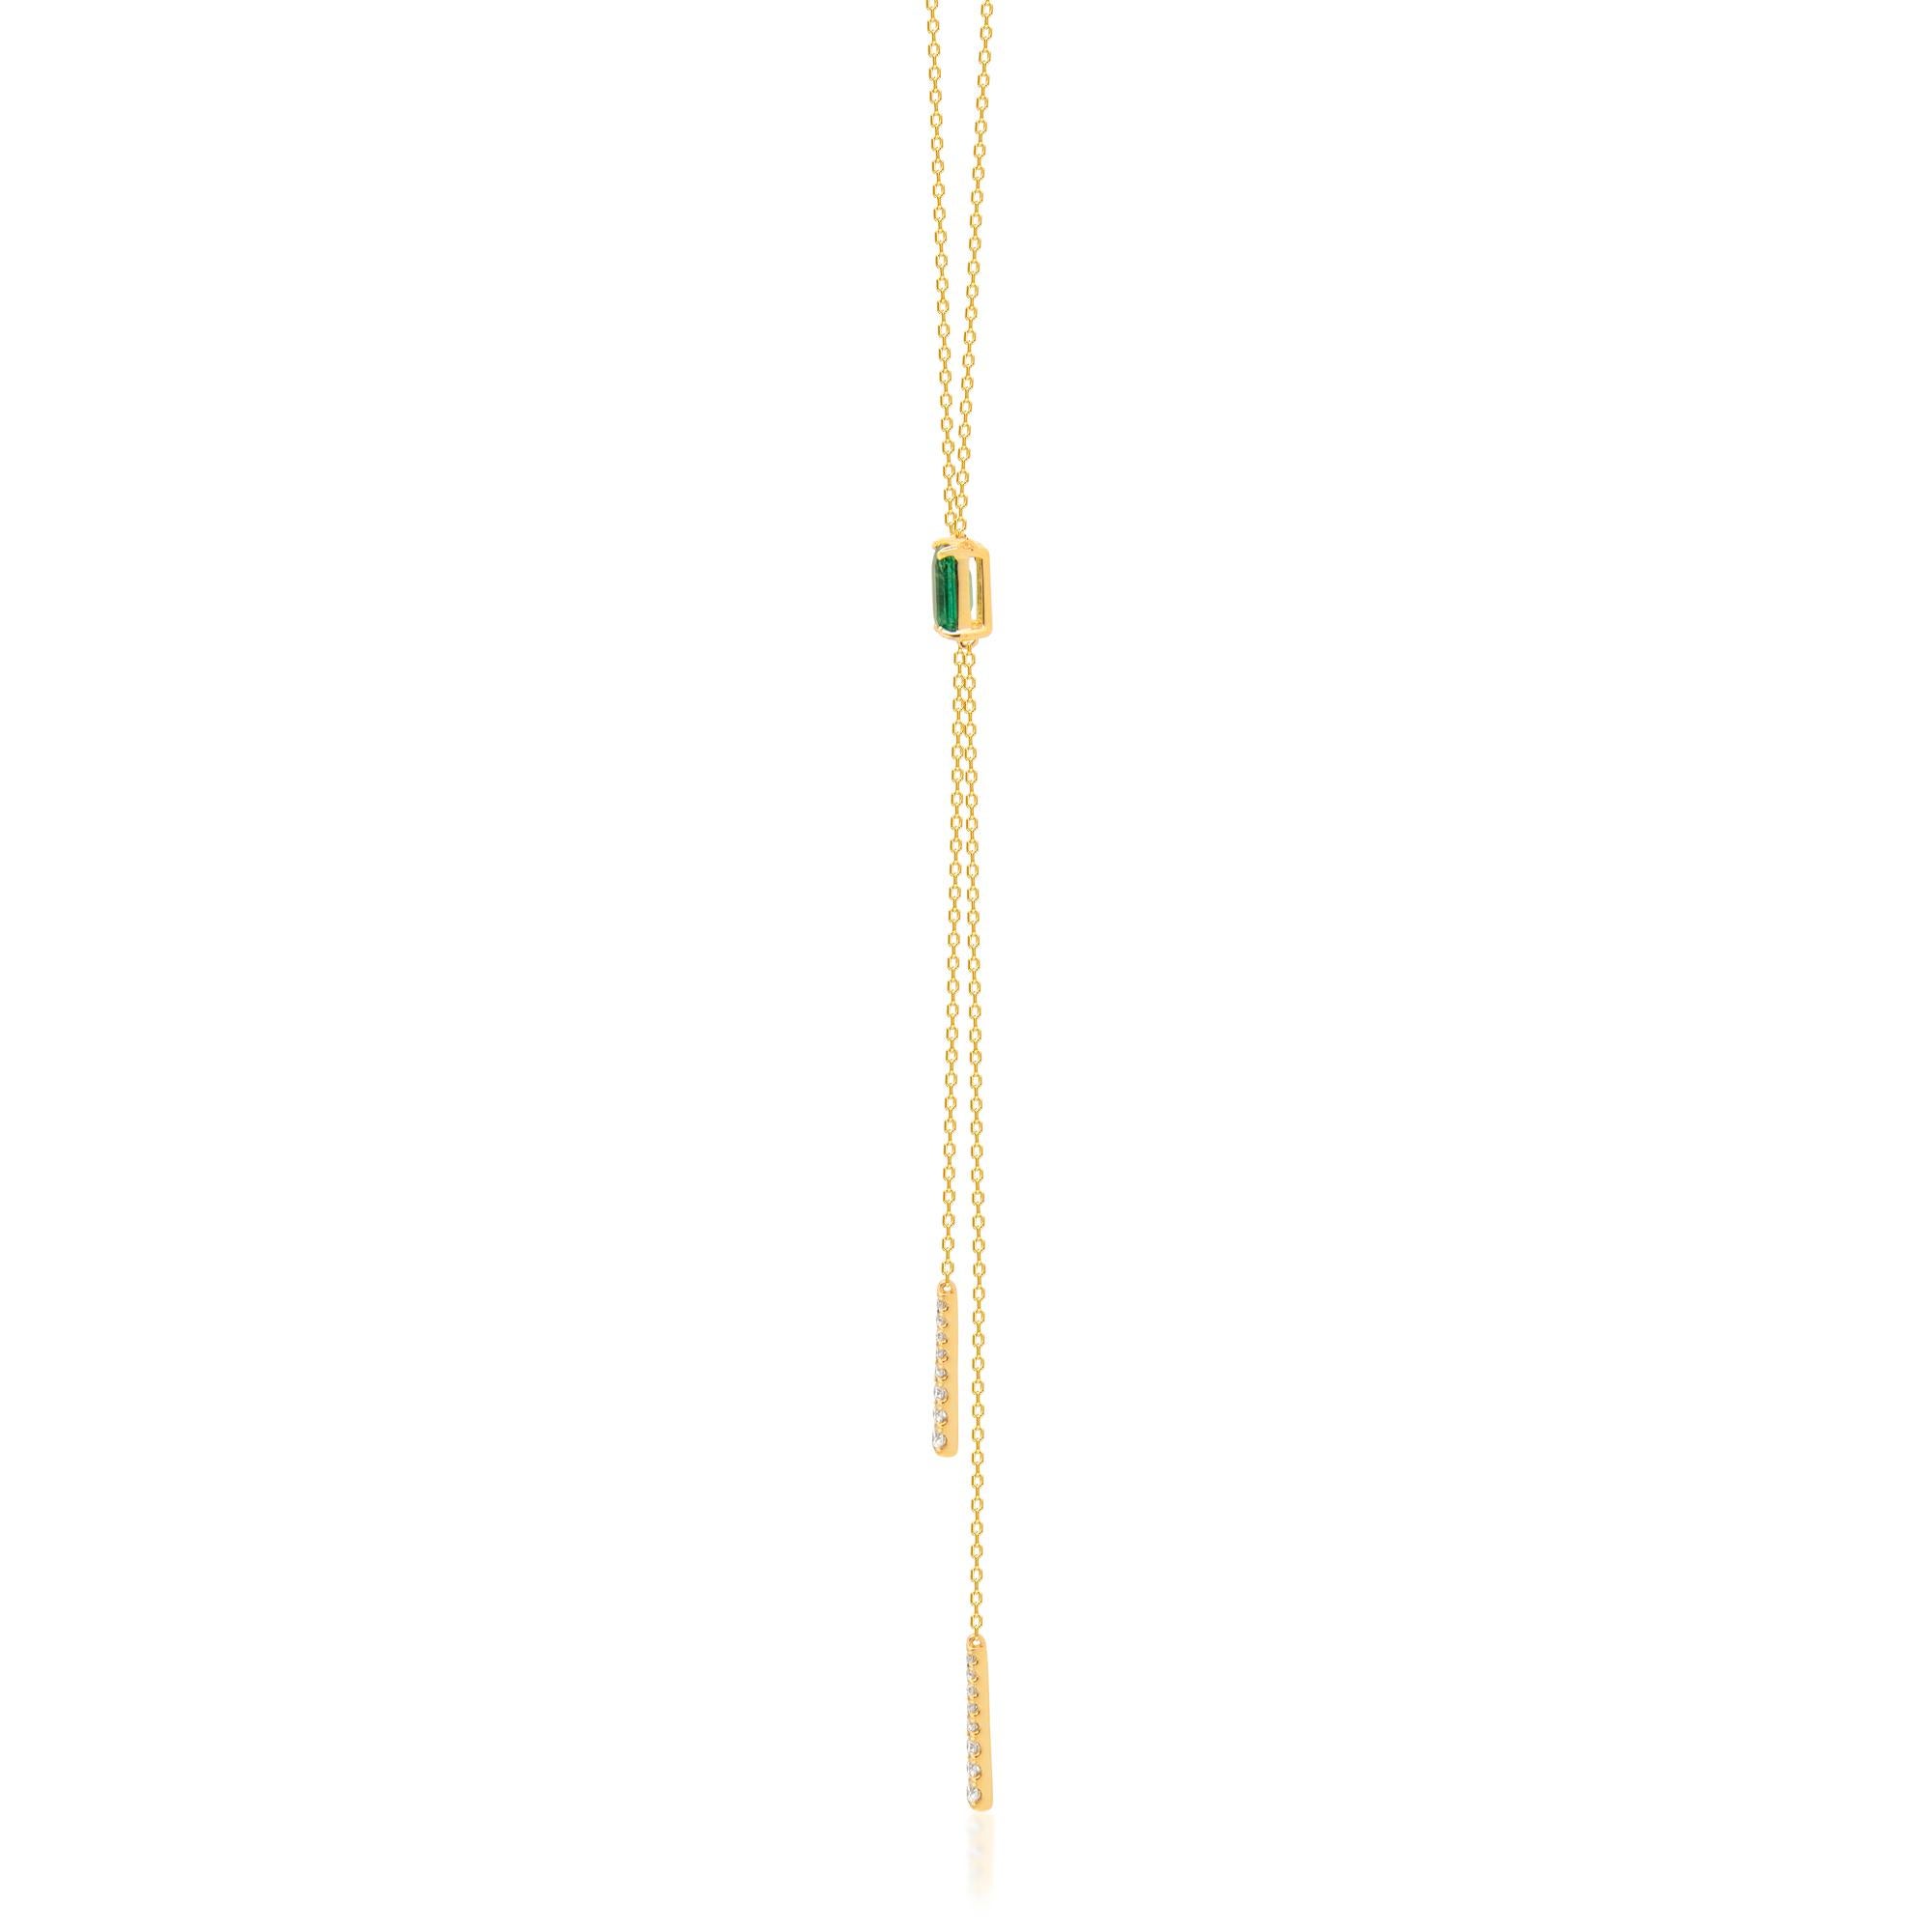 This beautiful Natural Emerald Necklace is crafted in 14-karat Yellow gold and features a 0.56 carat 1 Pc Natural Emerald, 20 Pcs Round White Diamonds in GH- I1 quality with 0.19 Ct  in a prong-setting. This Necklace comes in 18